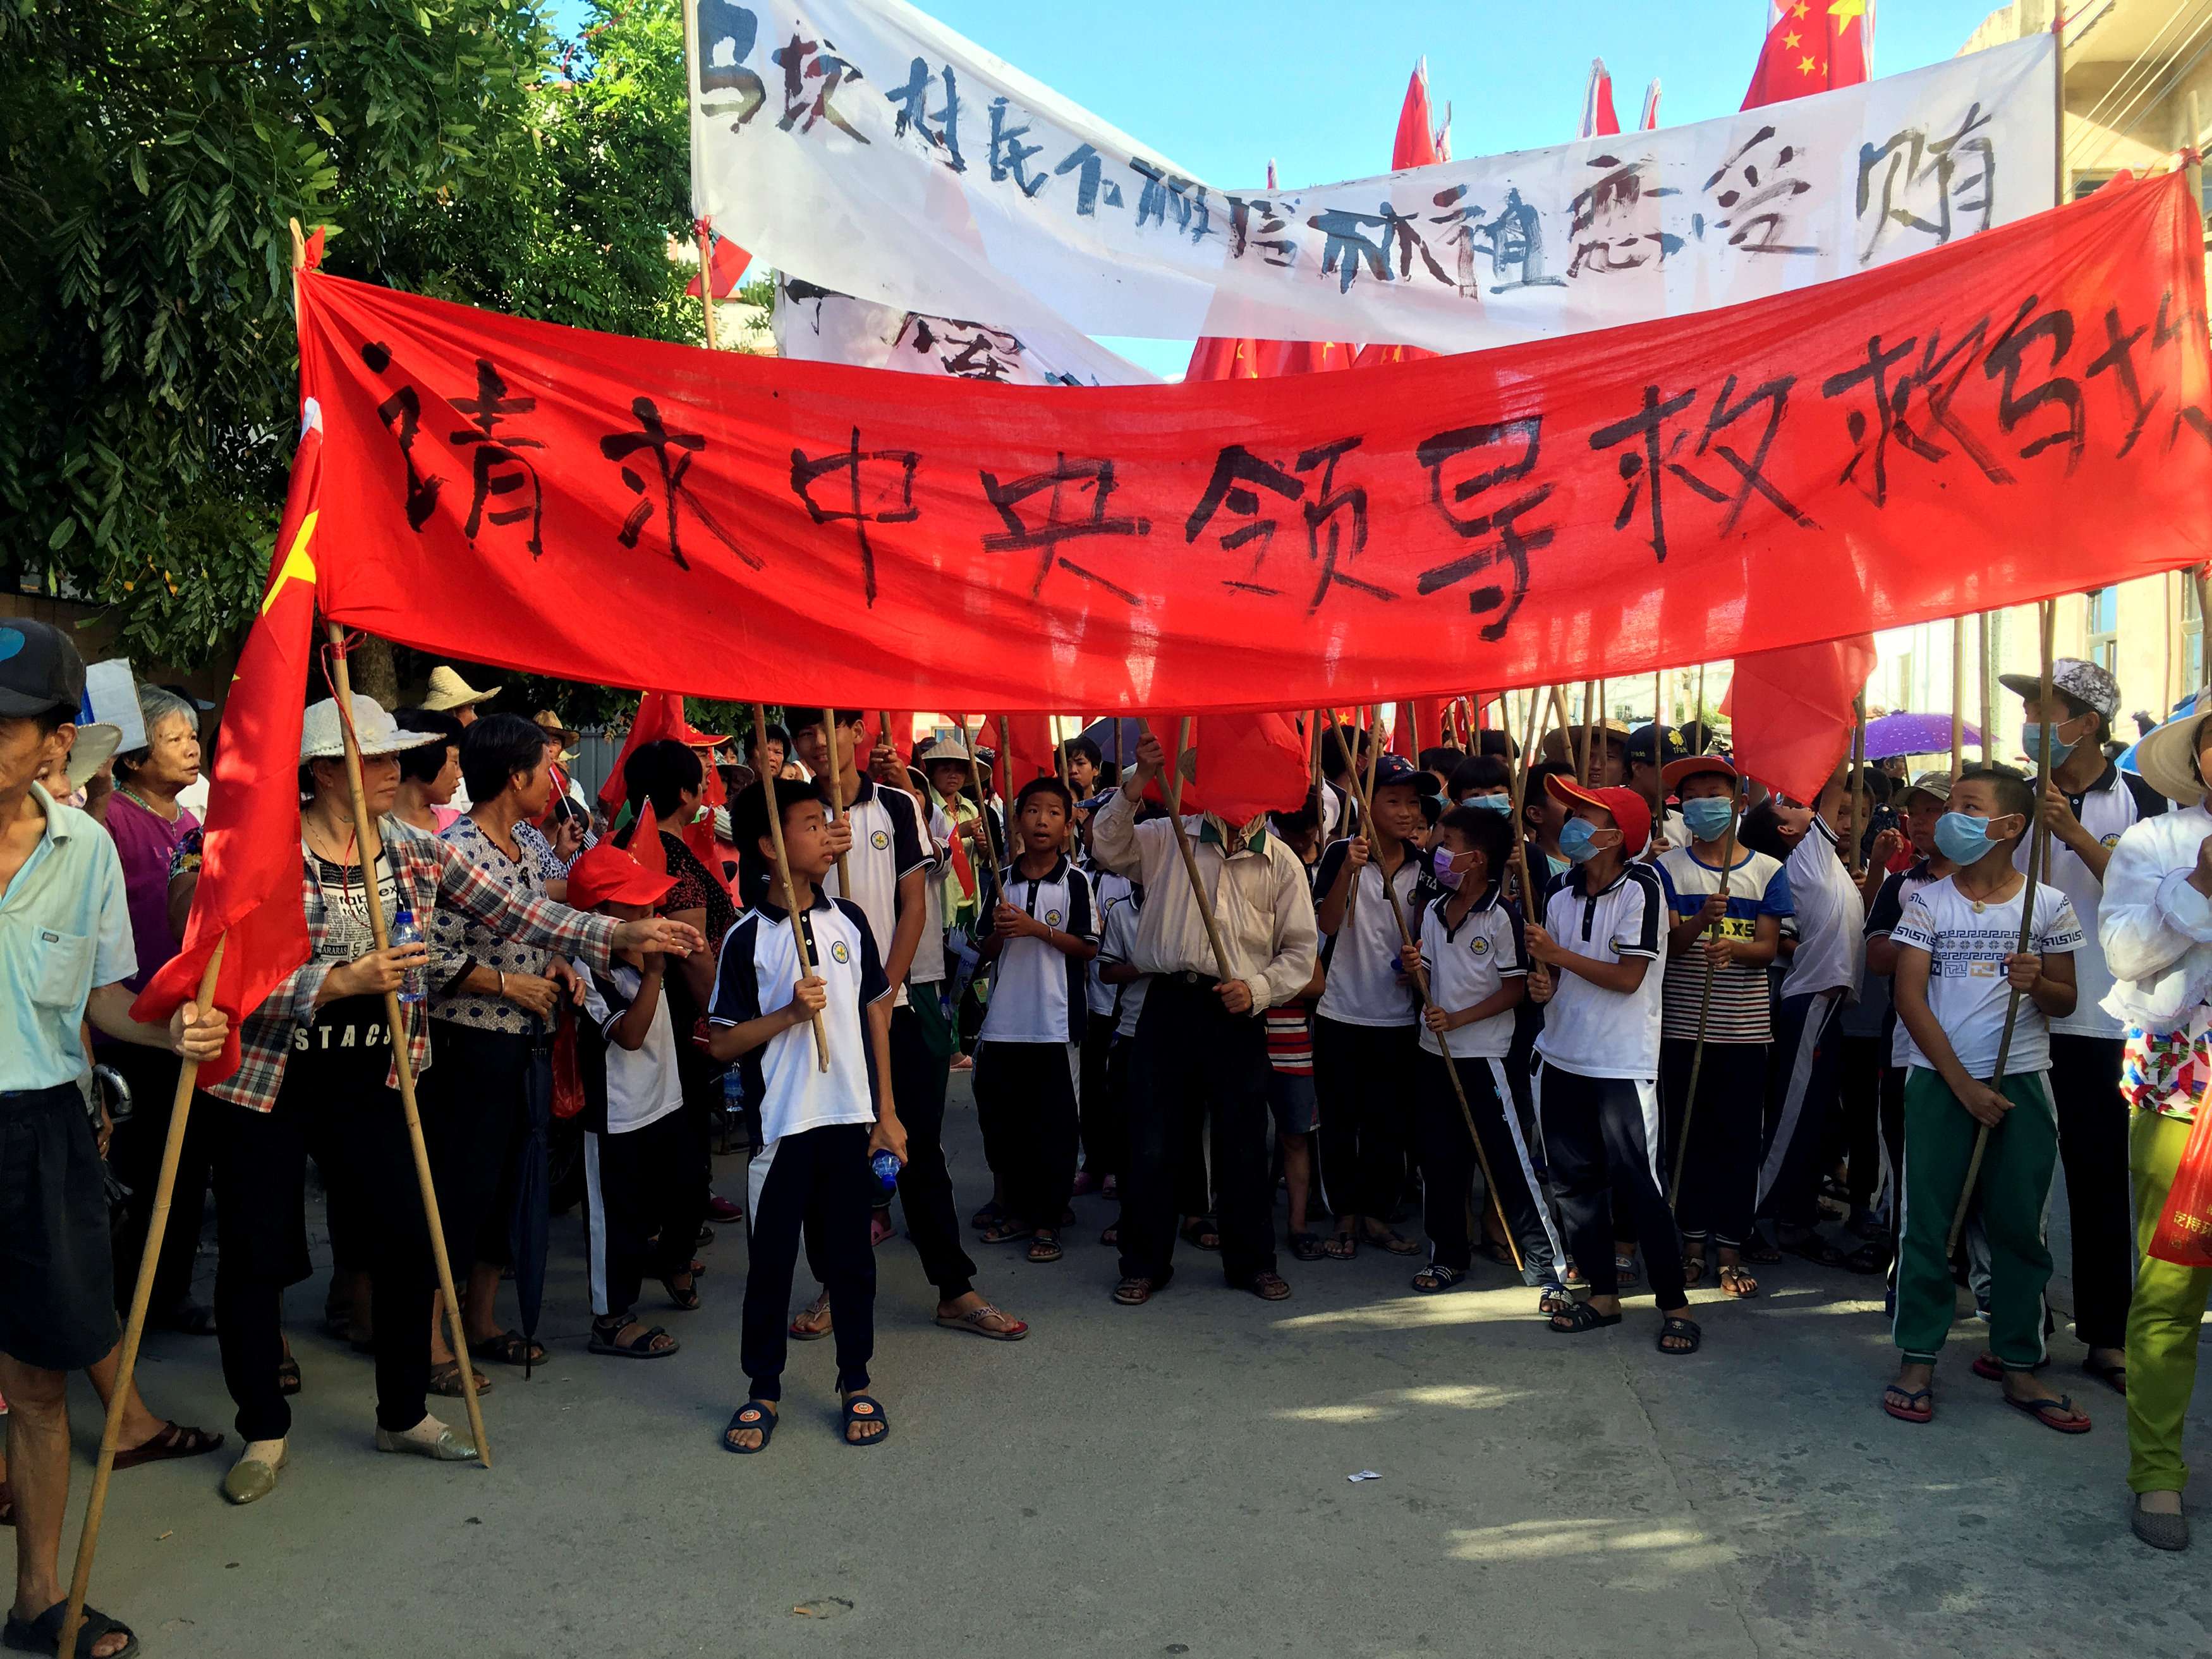 Villagers carry banners which read “Plead the central government to help Wukan” (in red) and “Wukan villagers don't believe Lin Zuluan took bribes” during a protest in Wukan, Guangdong province on Wednesday. Photo: Reuters